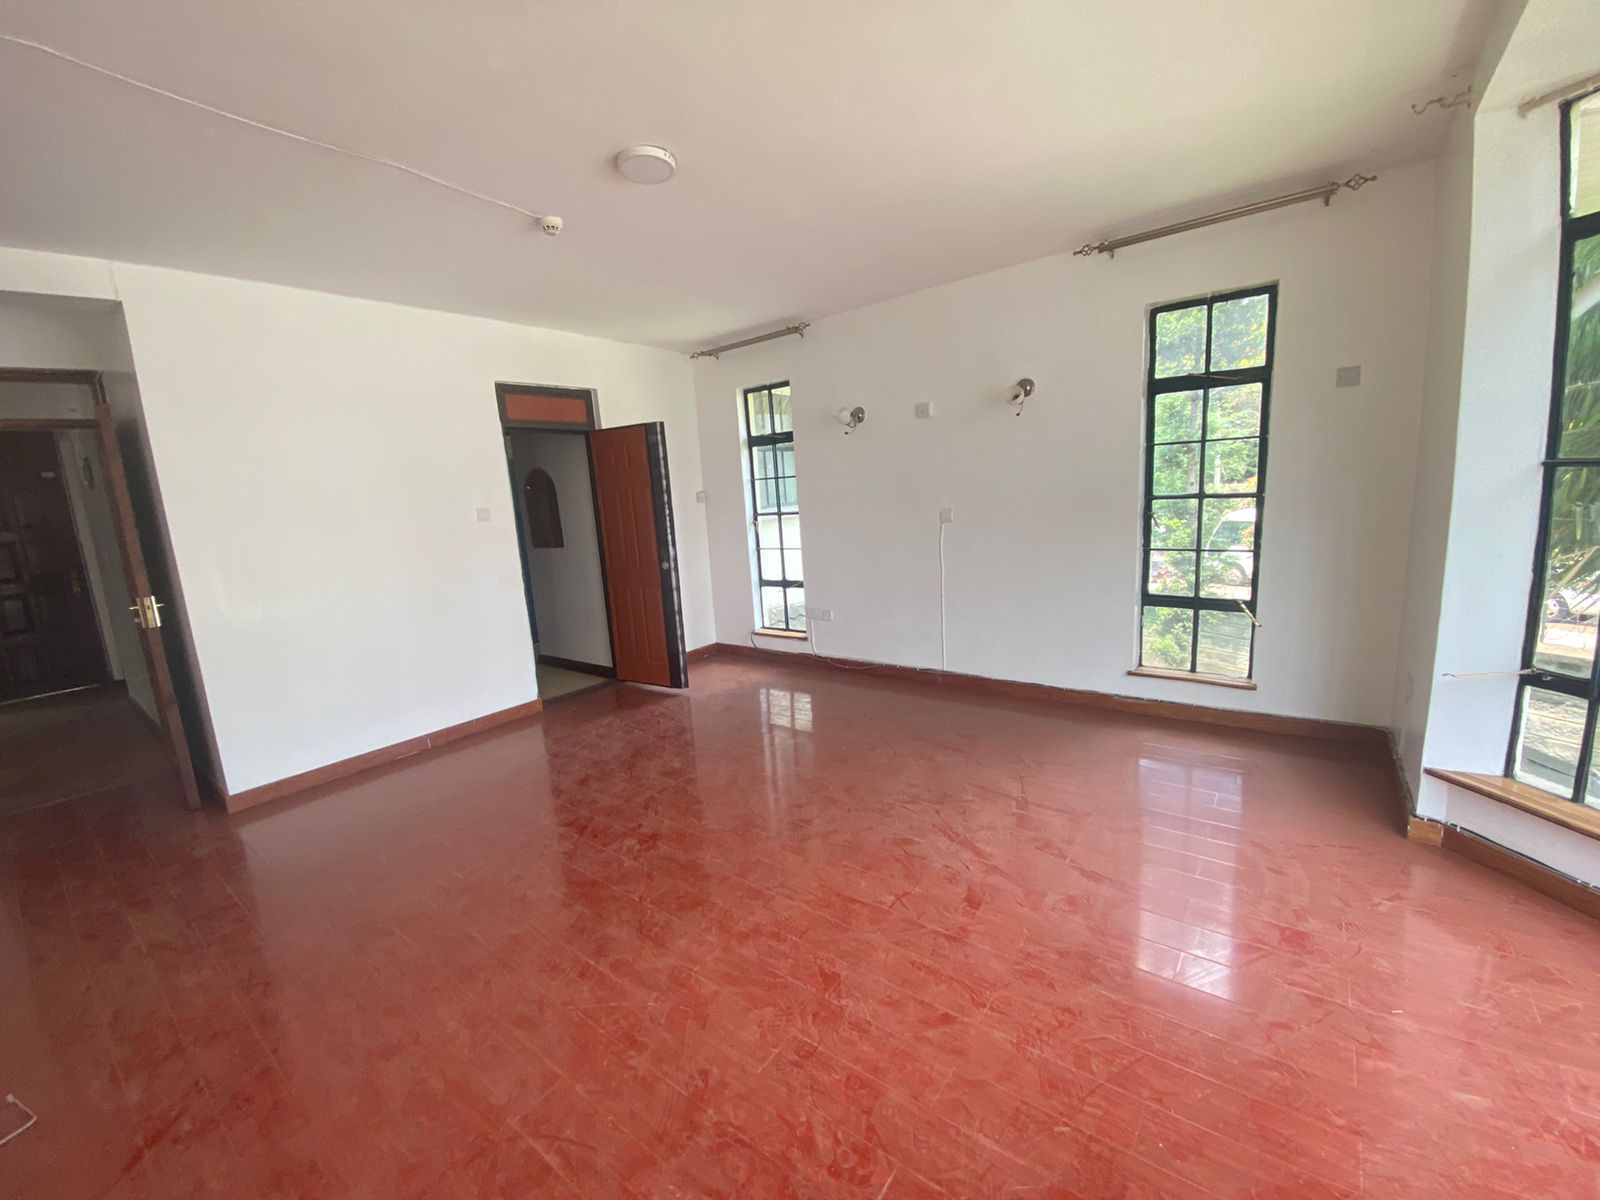 5 bedroom House in lavington all ensuite plus dsq for Sale at Ksh47m Negotiable (19)